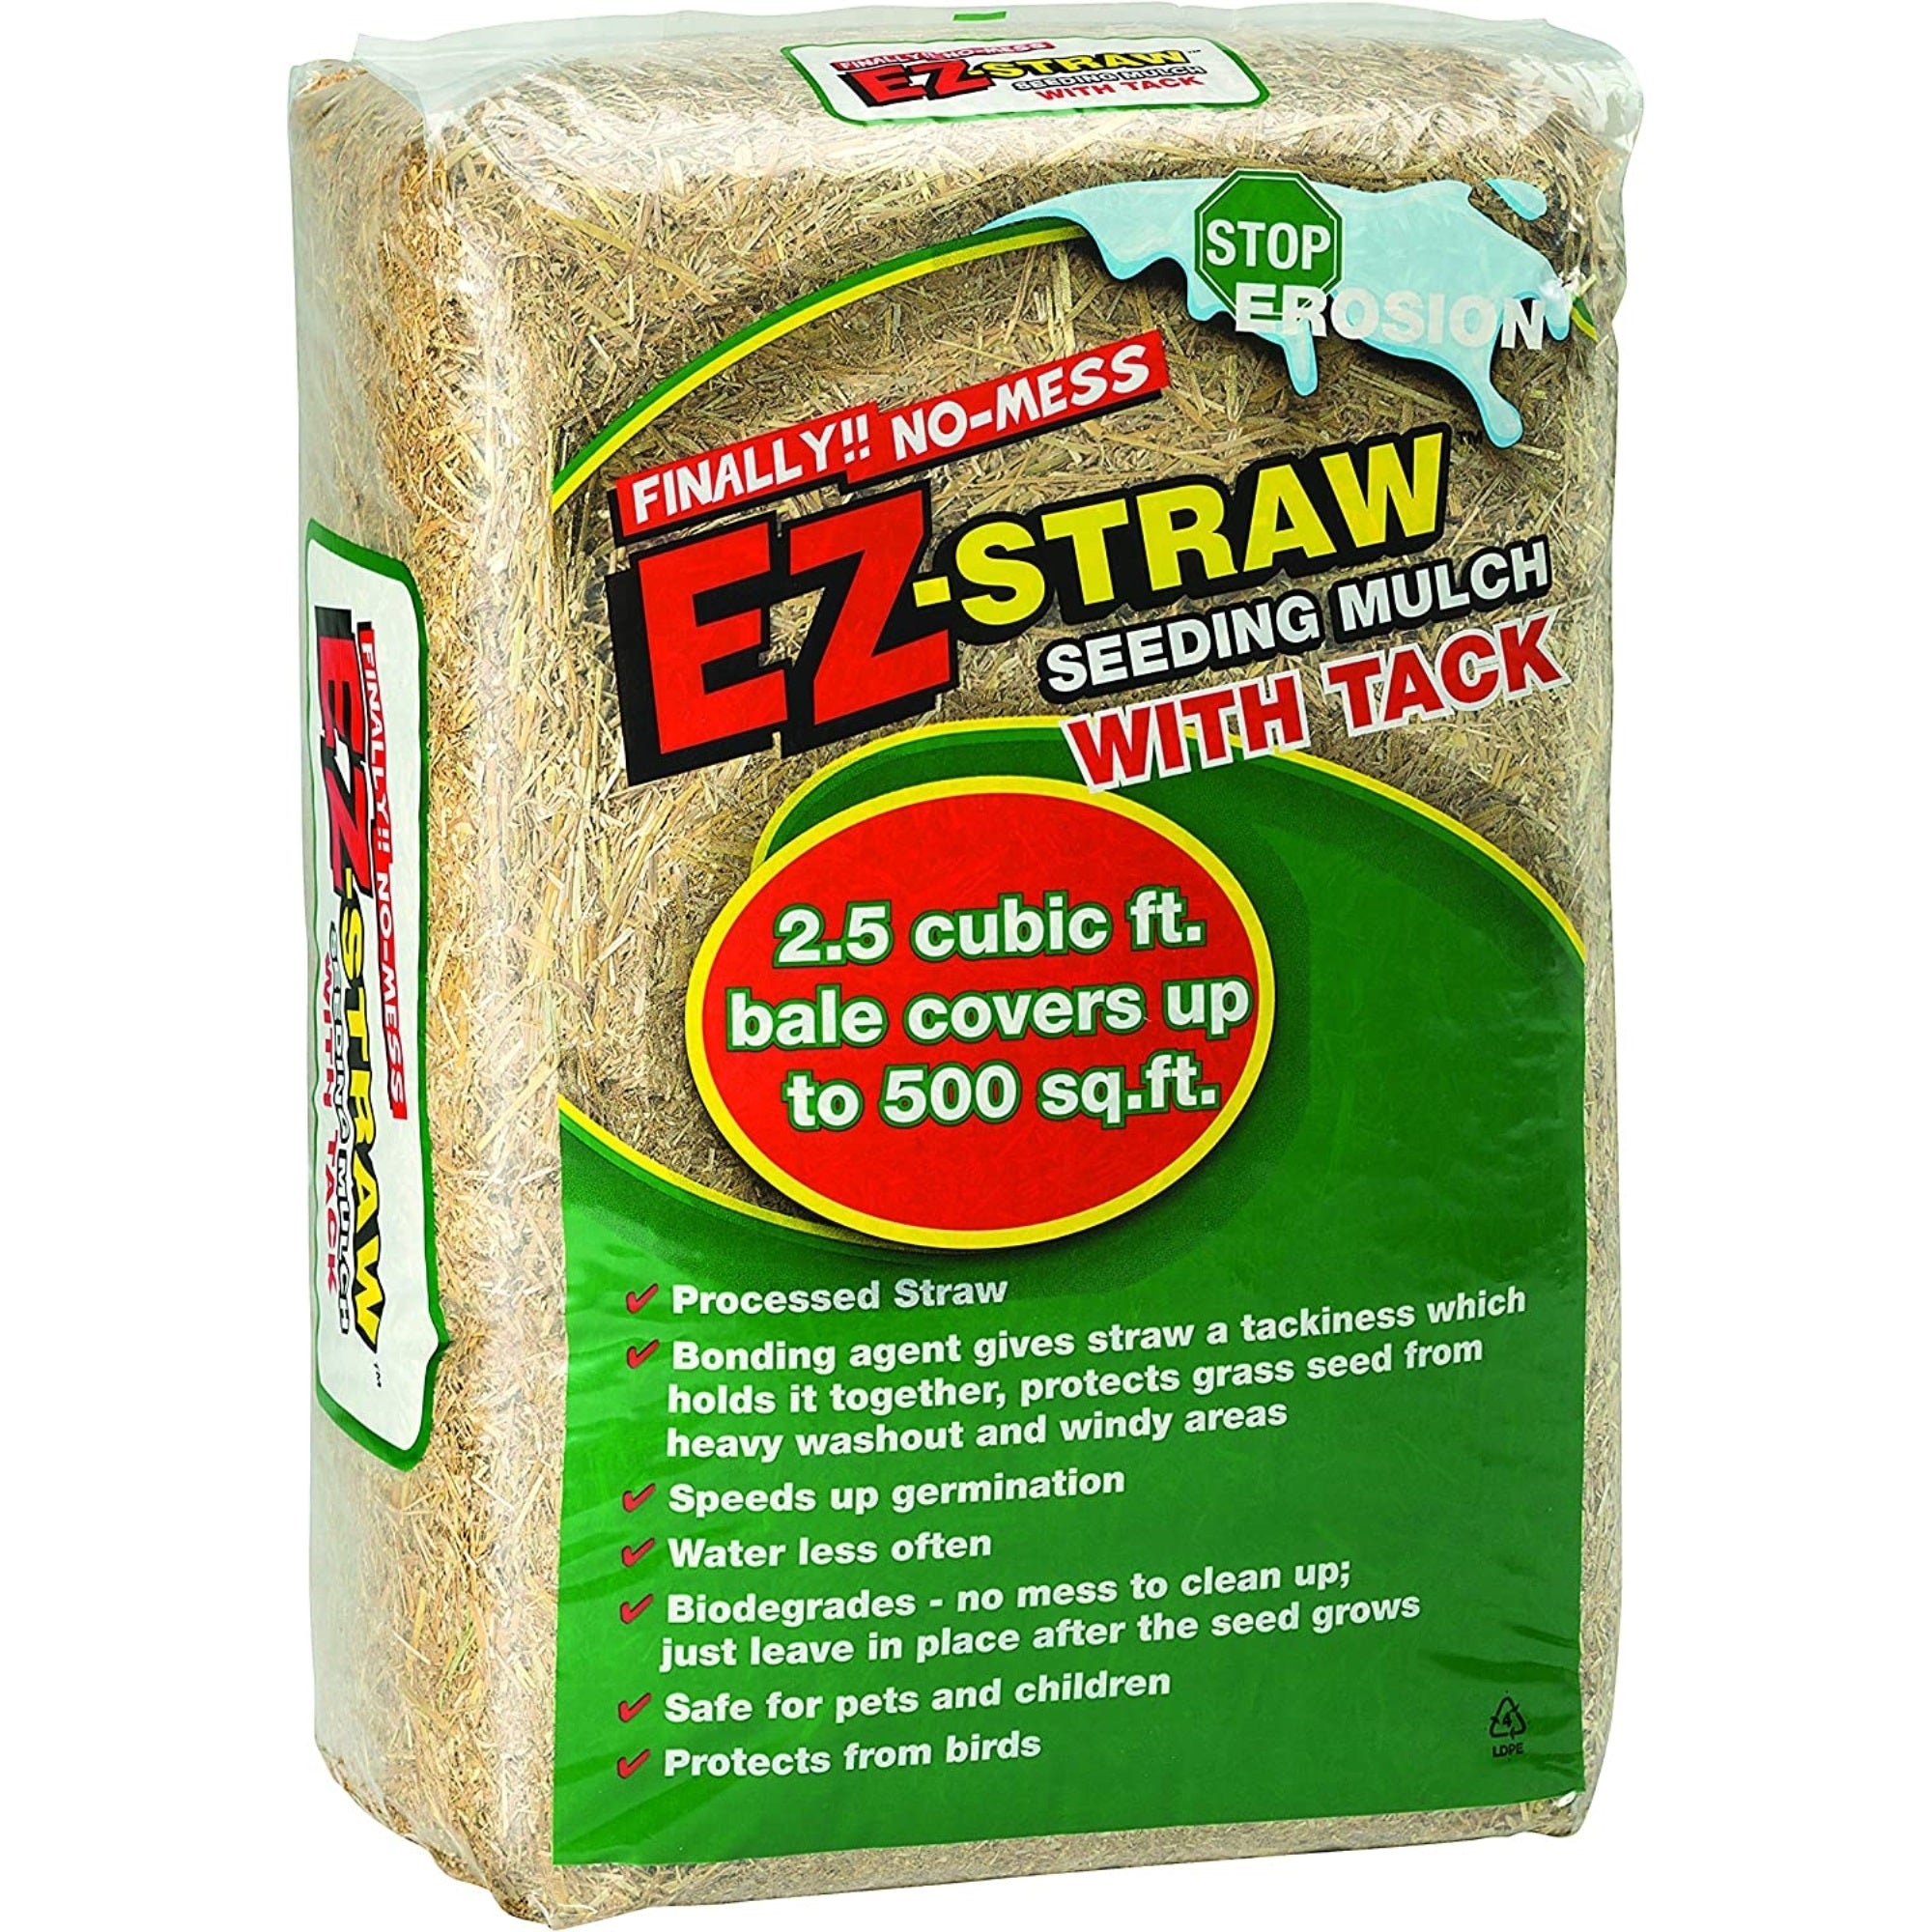 EZ-Straw Seeding Mulch with Tackifier - Biodegradable Processed Straw a 2.5 CU FT Bale